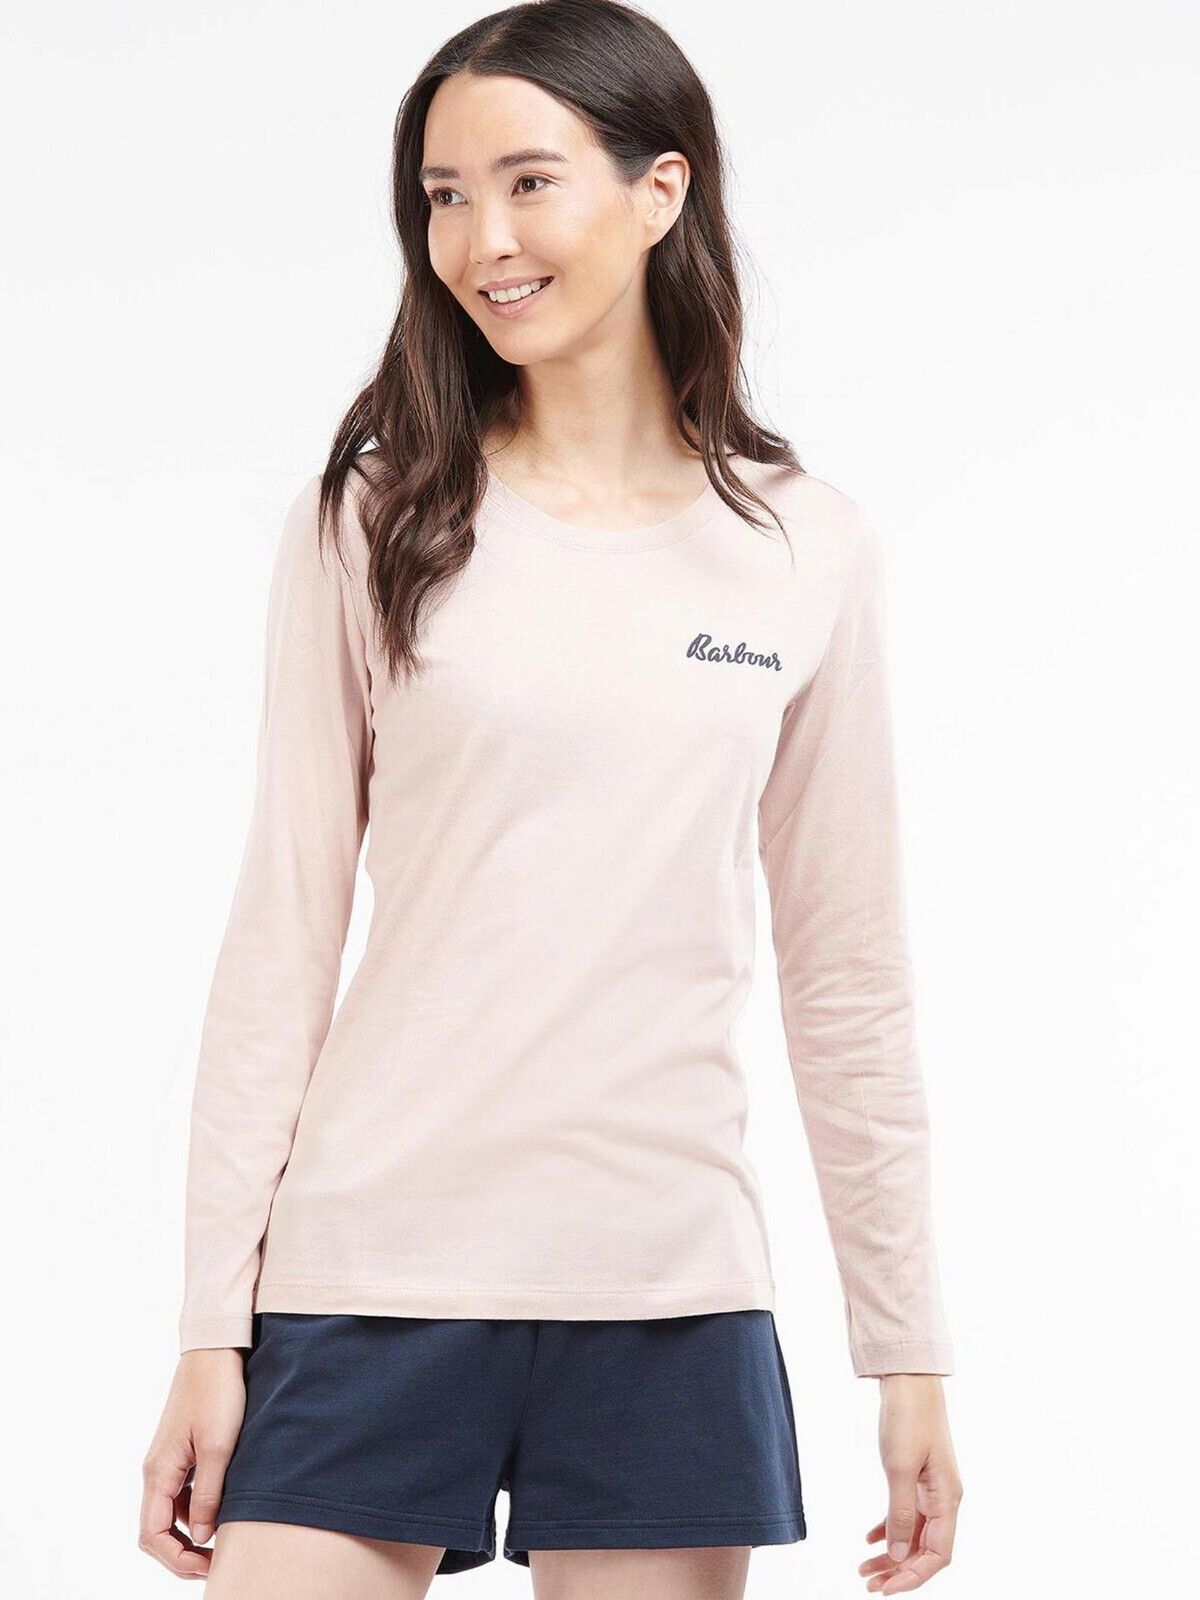 Barbour Edie Long Sleeve Lounge Top - Light Pink. UK XS. ****V94